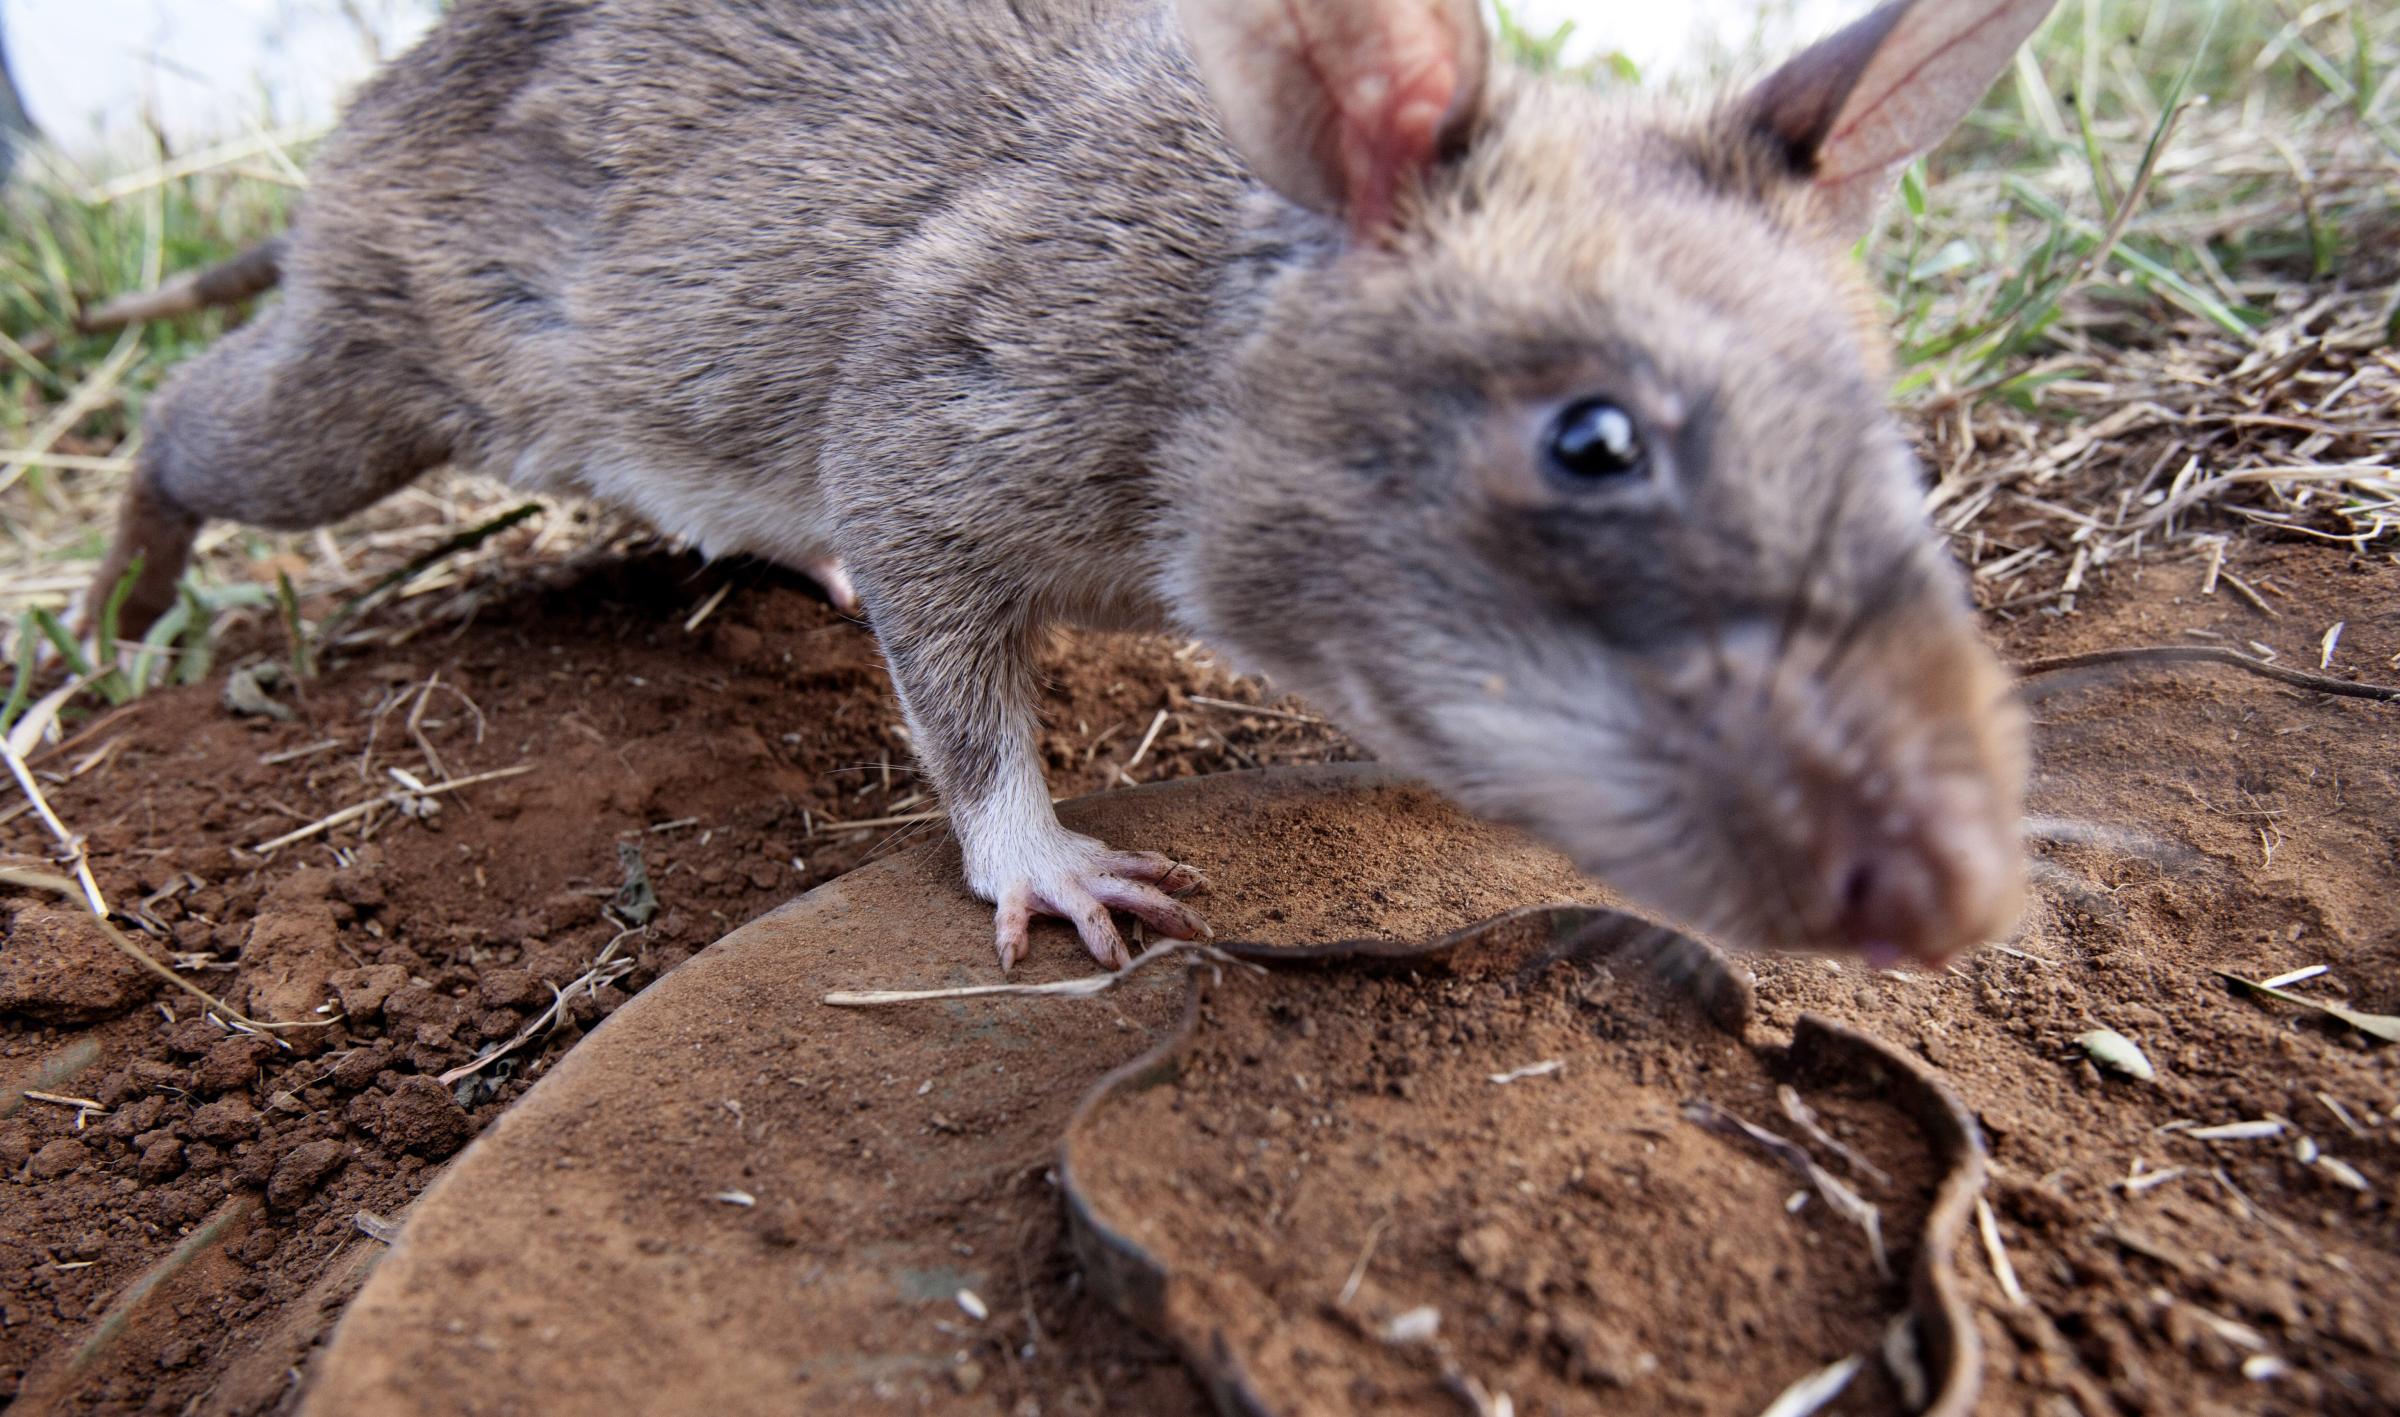 A HeroRAT sniffs out a mine on June 20, 2014 in Morogoro, Tanzania.